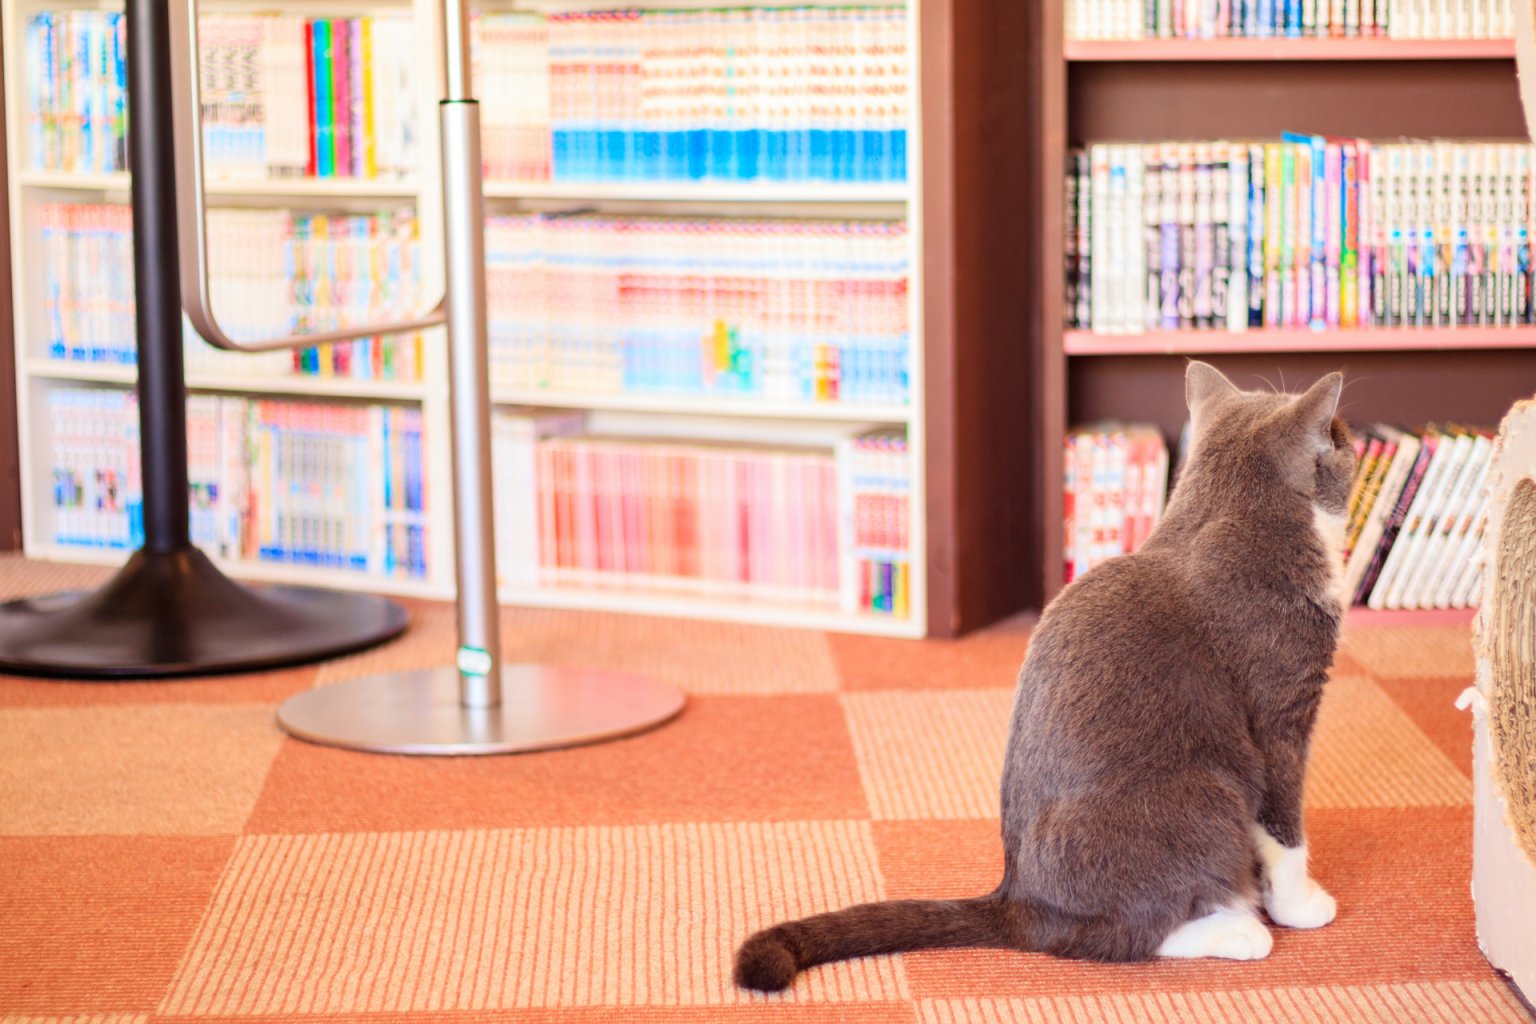 5 Best Animal Cafes with Cute Animals in Kyoto | Japan Wonder Travel Blog